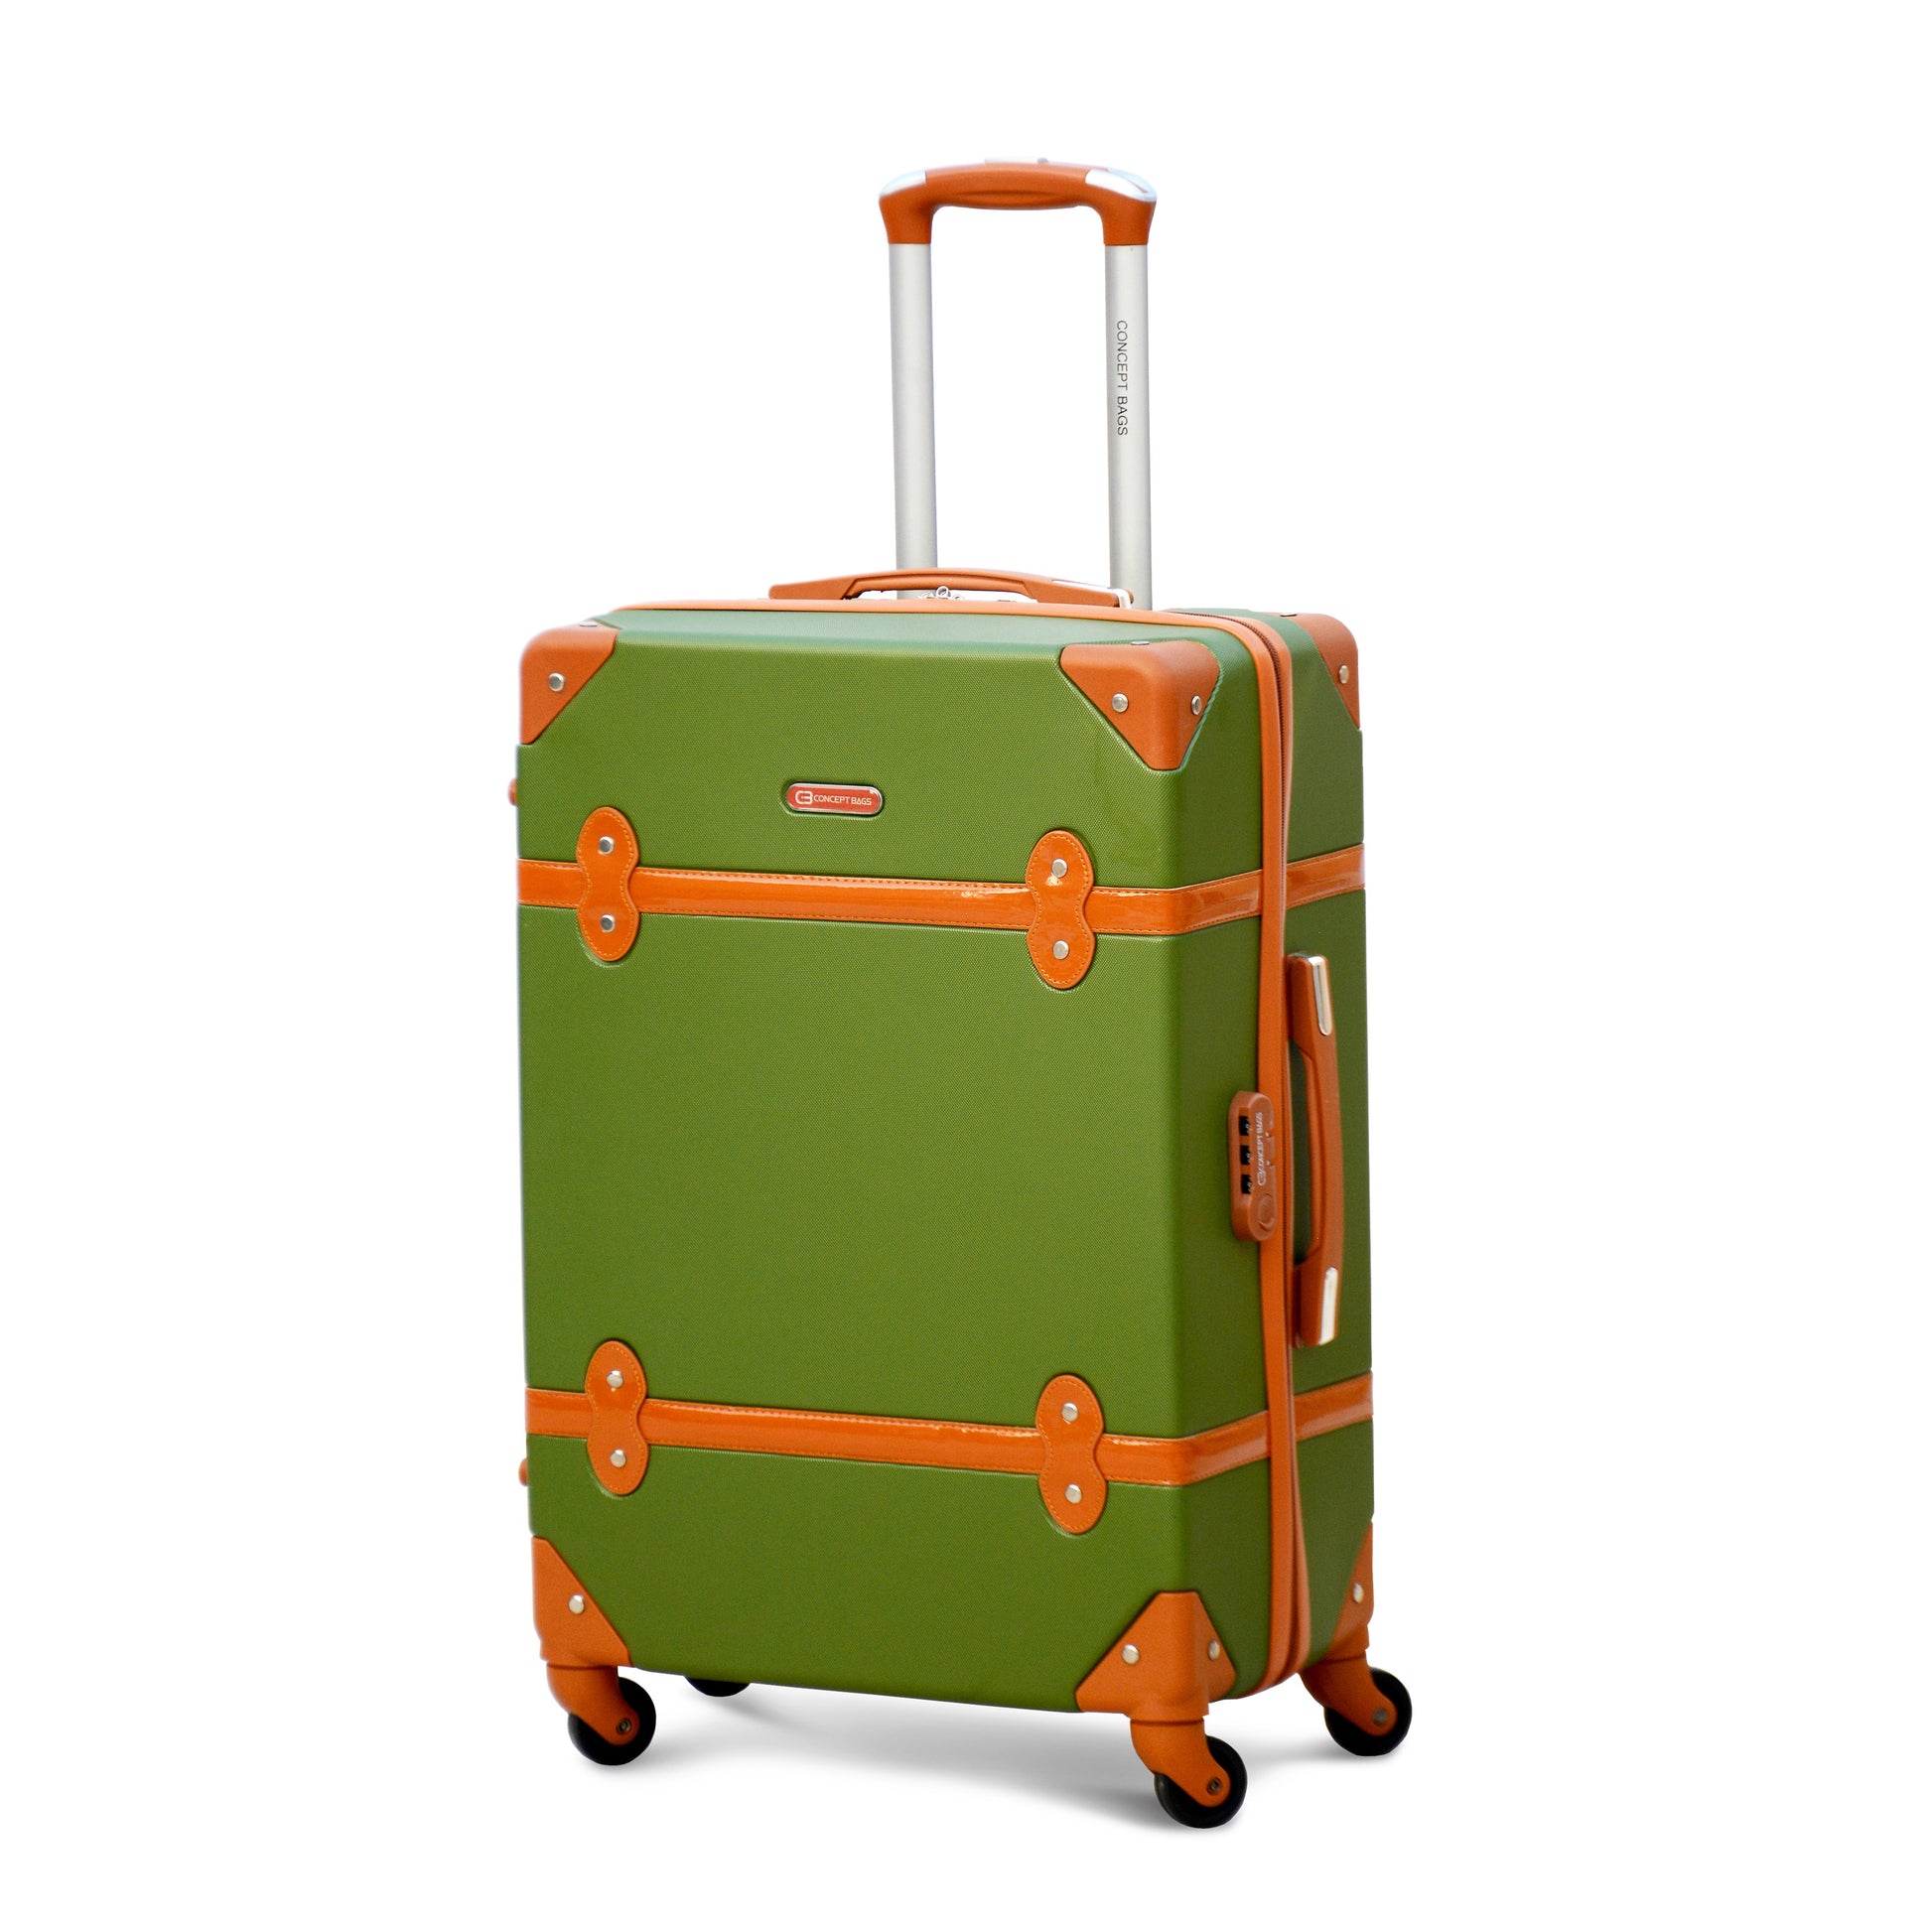 light weight spinner wheel light weight green luggage corner guard luggage with number lock system